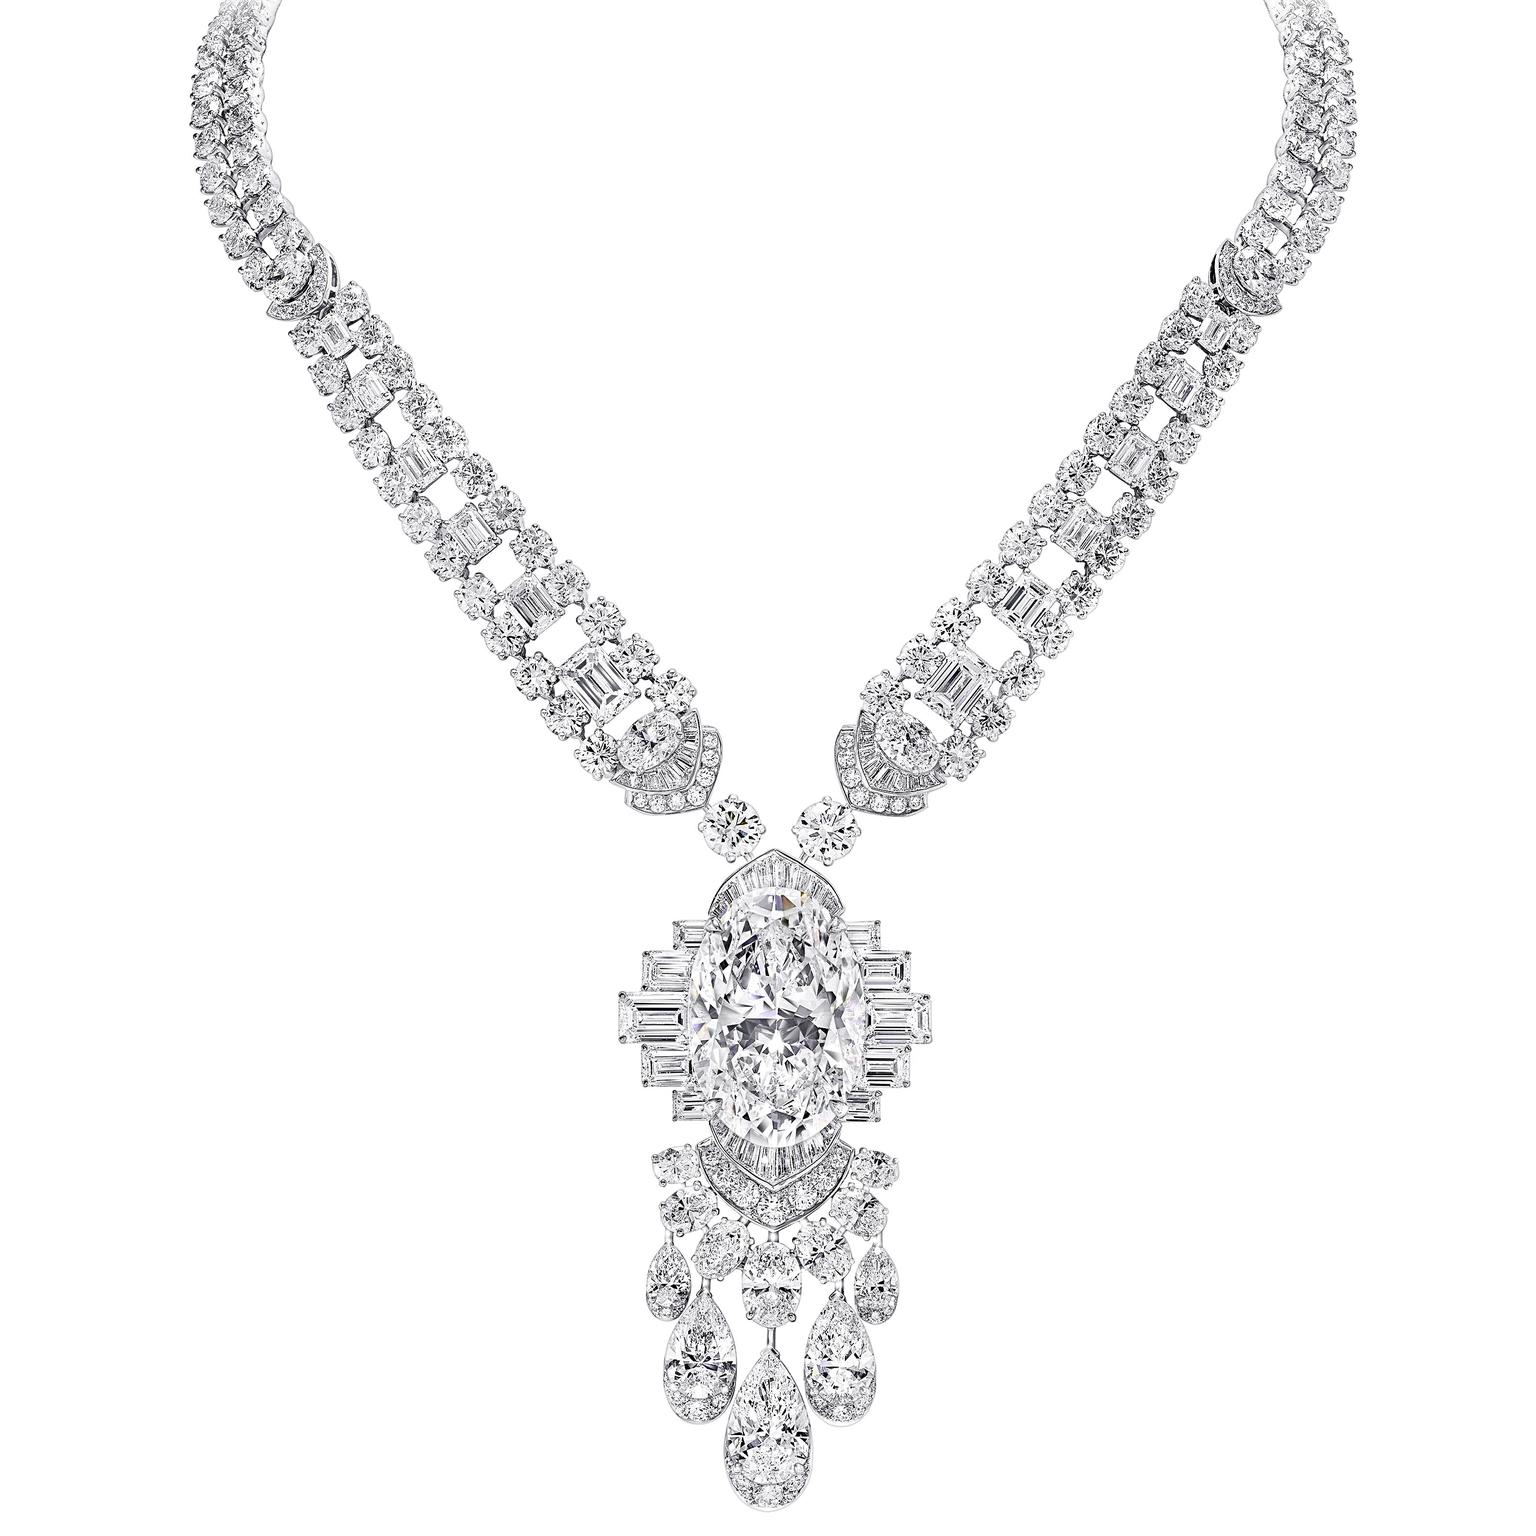 50 carat D Flawless necklace by Graff